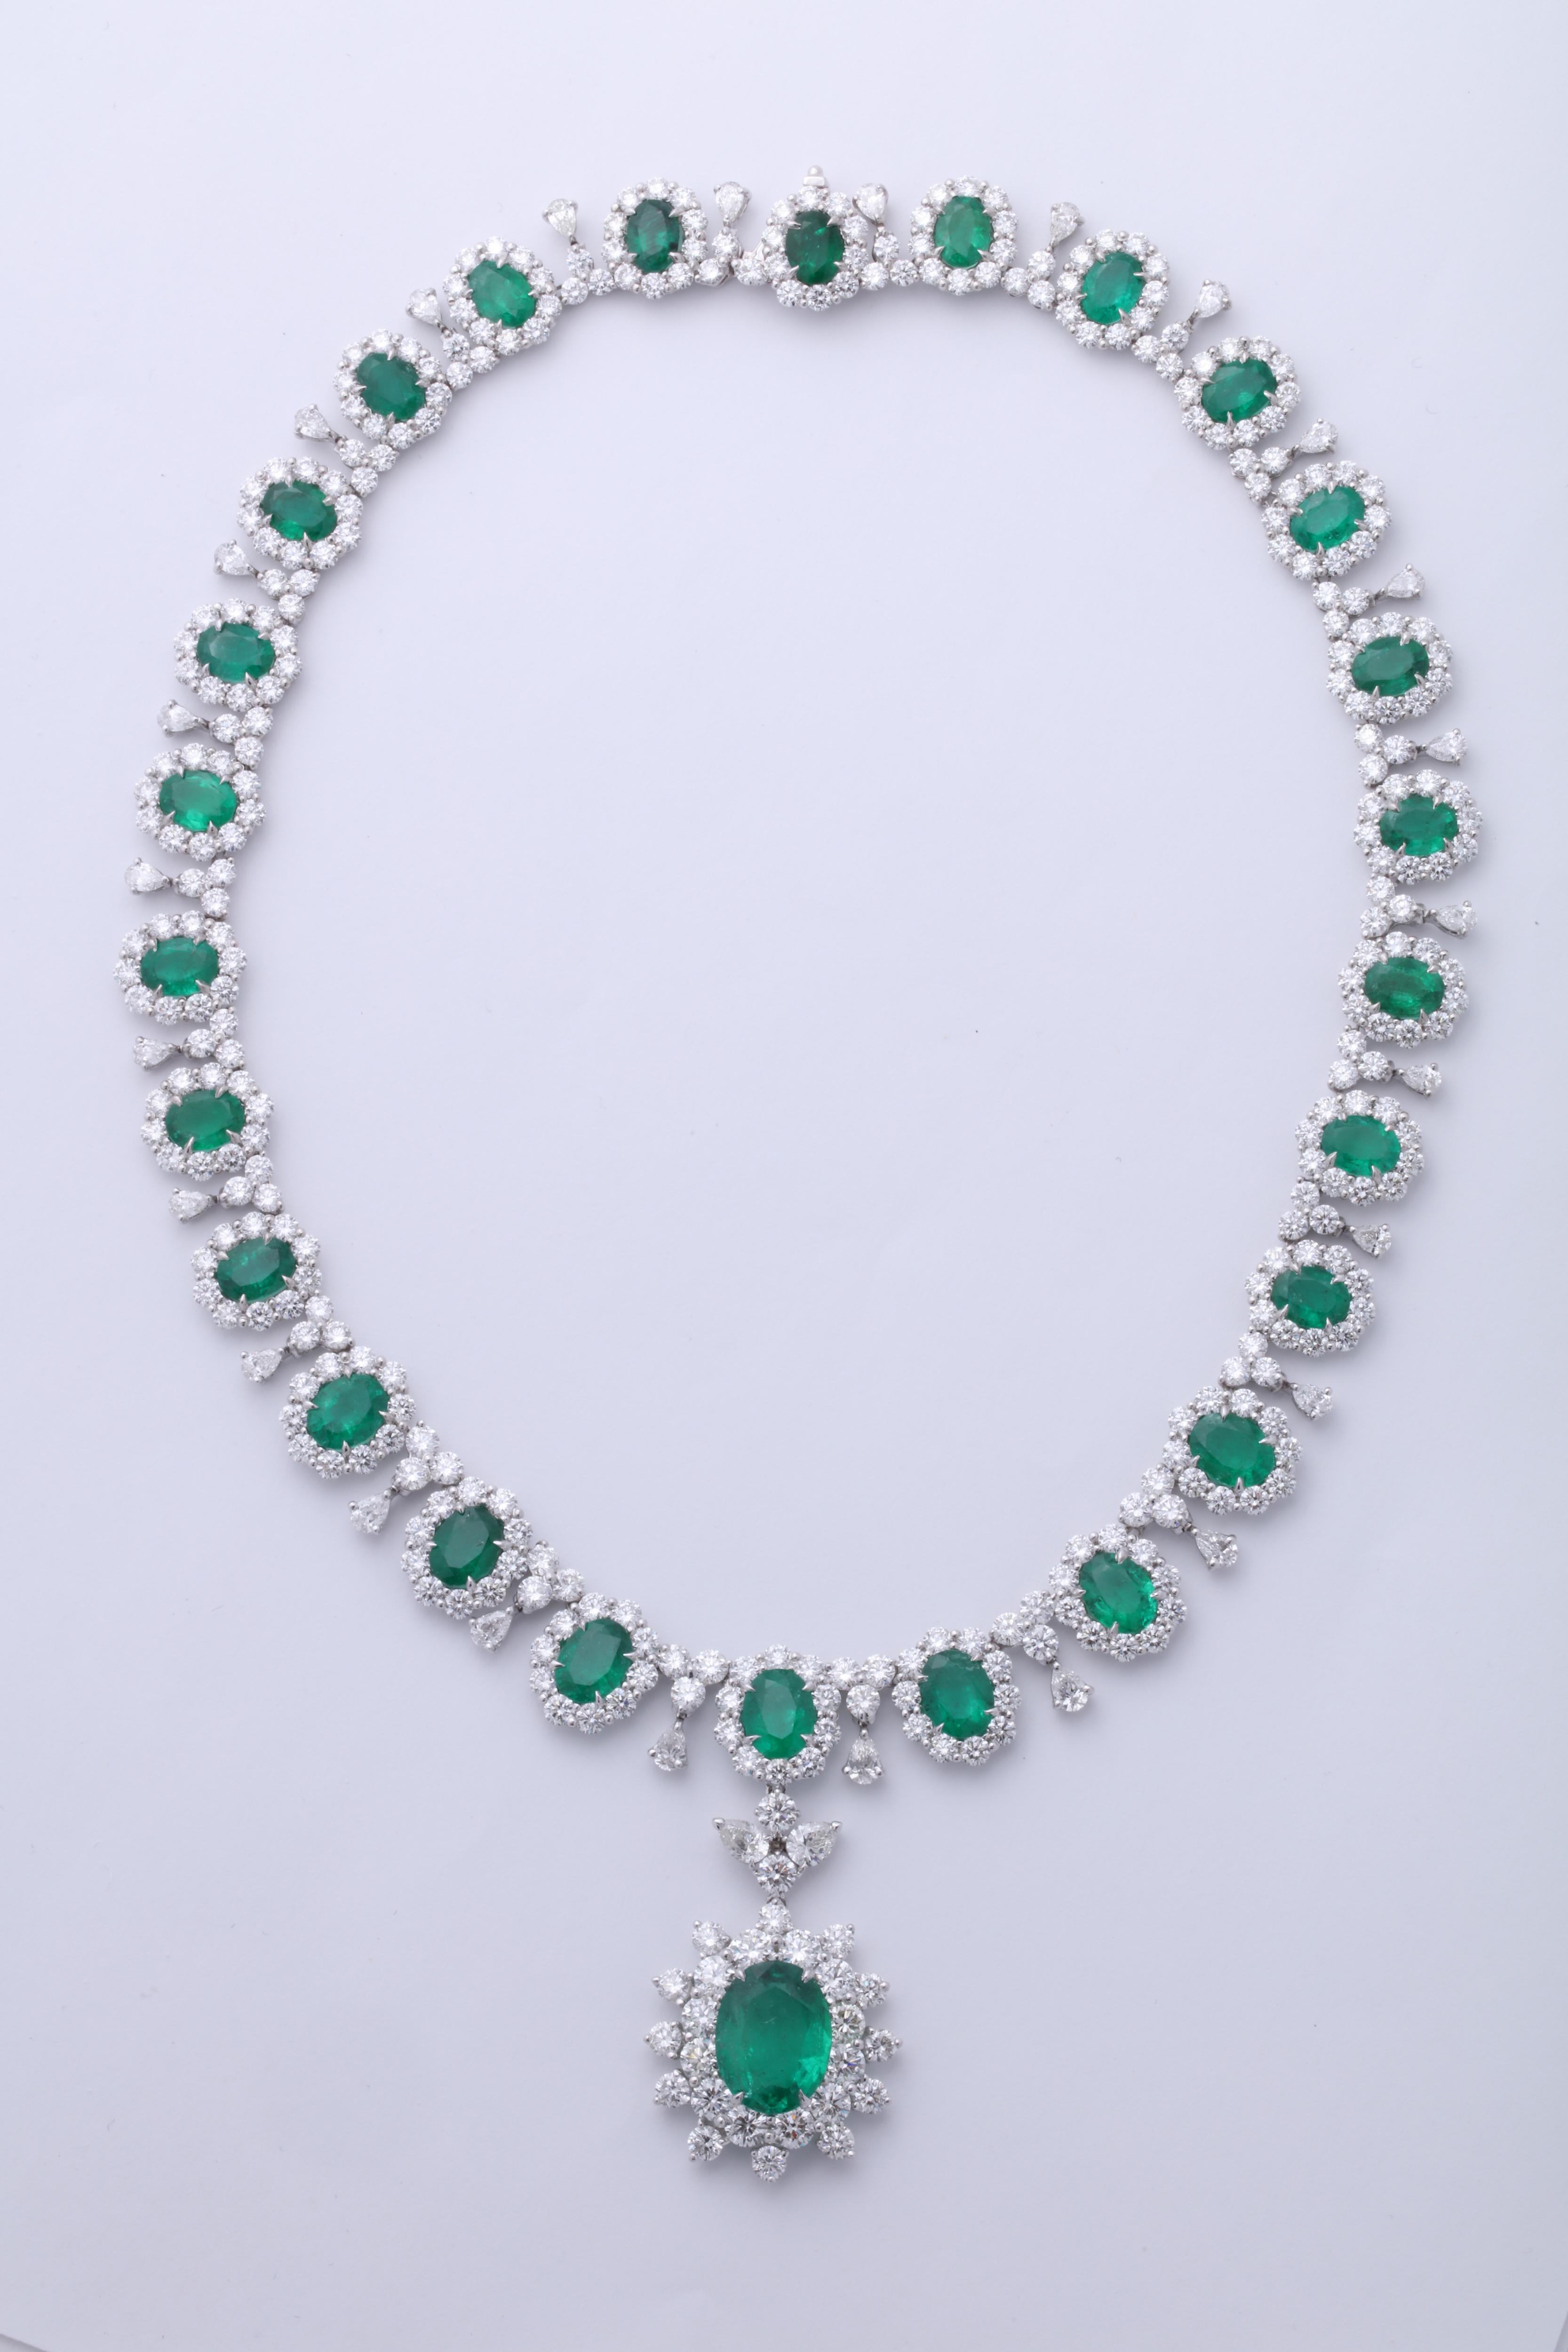 
A grand emerald and diamond necklace.

39.09 carats of fine green emerald, 48.47 carats of white round and pear shaped diamonds. 

Set in platinum

The necklace measures 16.5 inches but can easily be adjusted. 
It is also possible to make the